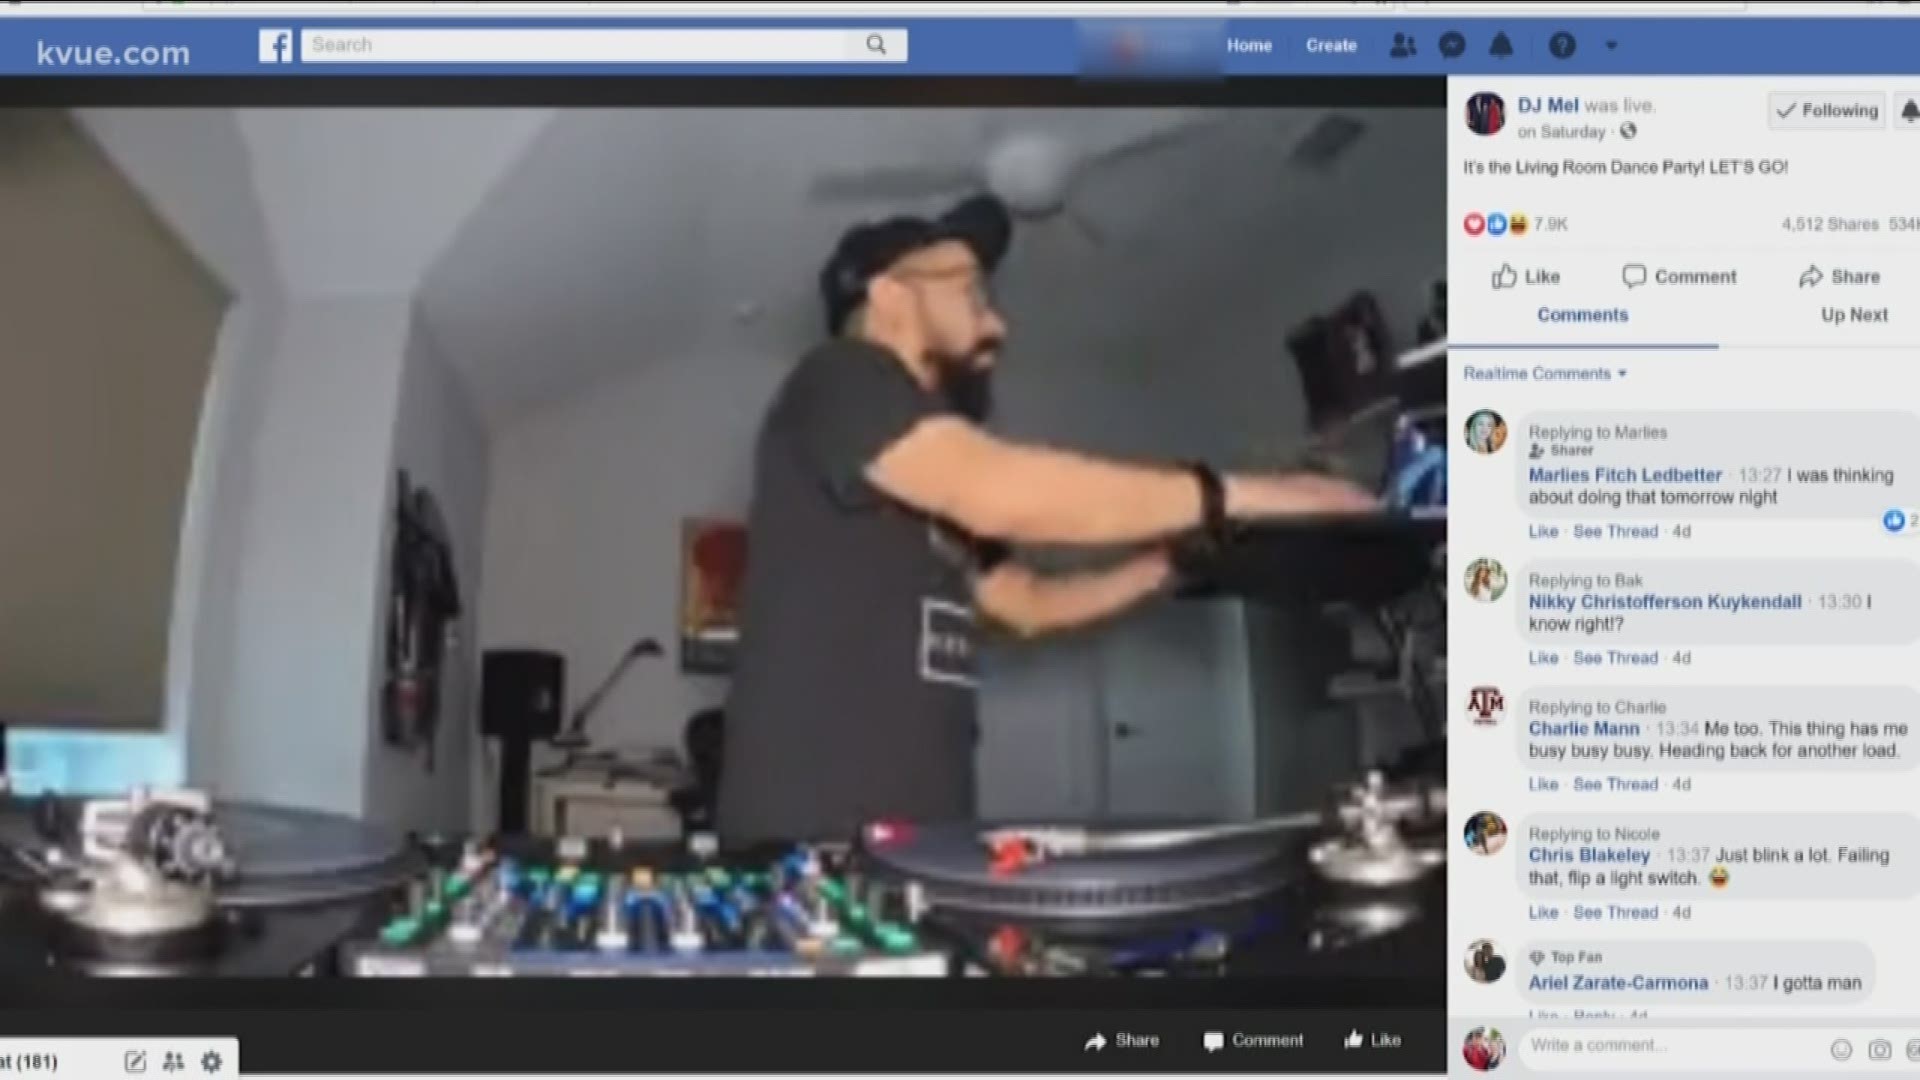 With so many people trying to maintain their social distance, a local DJ is doing what he can to keep everyone entertained.